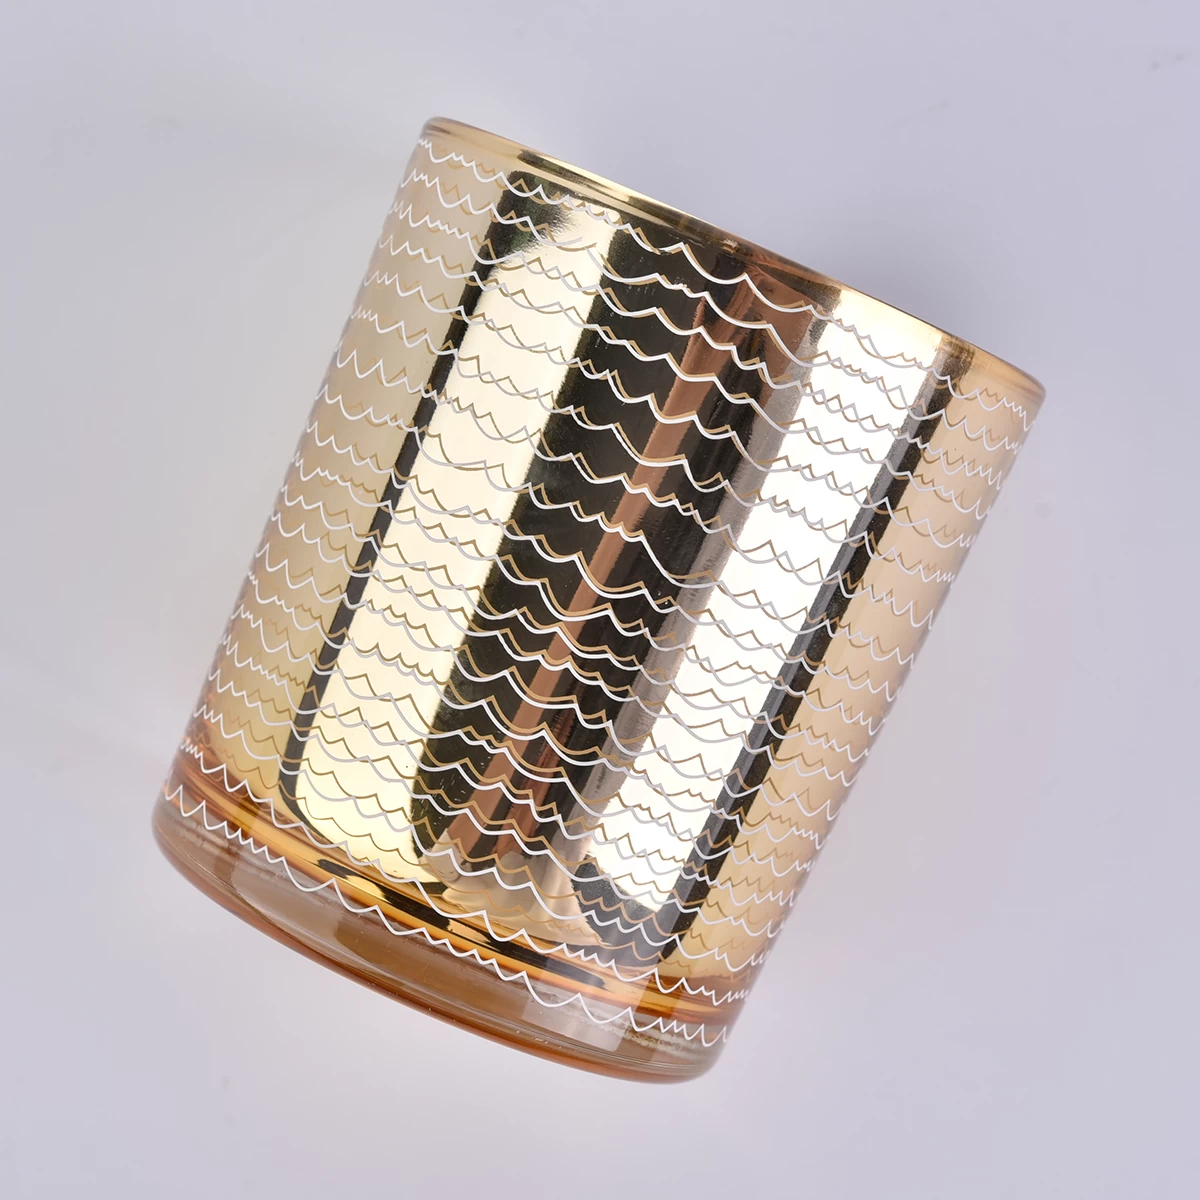 Electroplating gold glass candle jar with wavy line